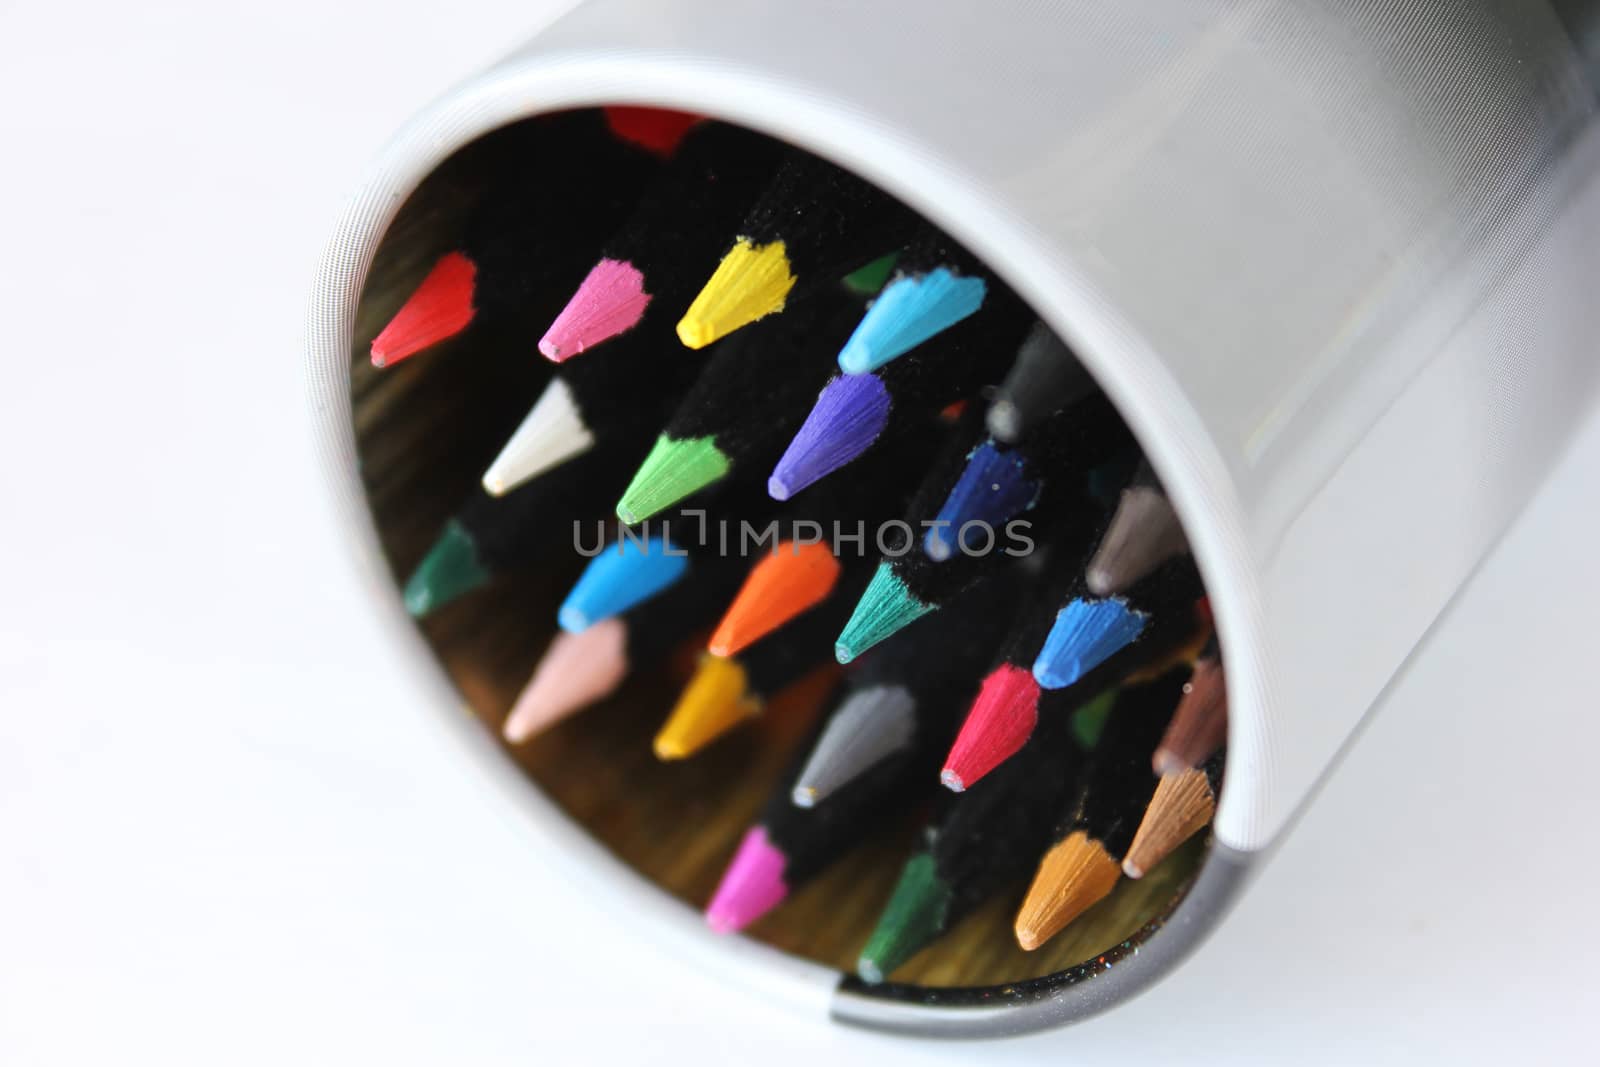 Set of colored pencils for drawing in the round box